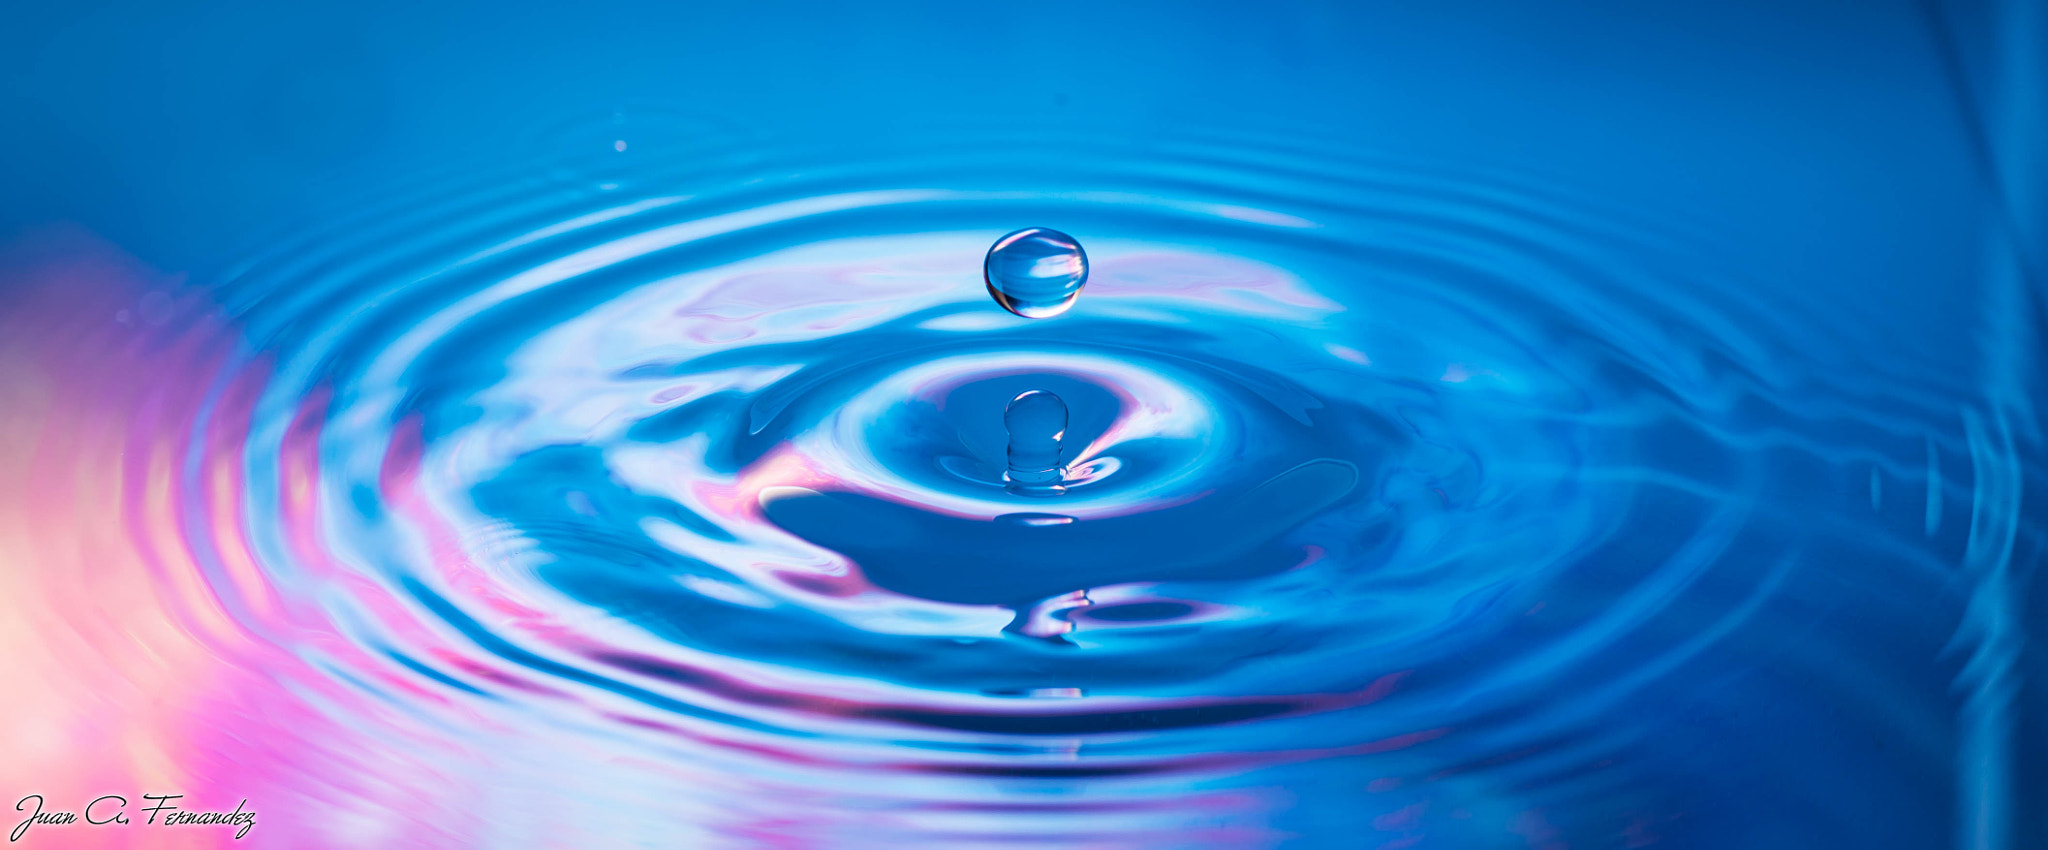 Nikon D610 sample photo. Water drop purple and blue photography